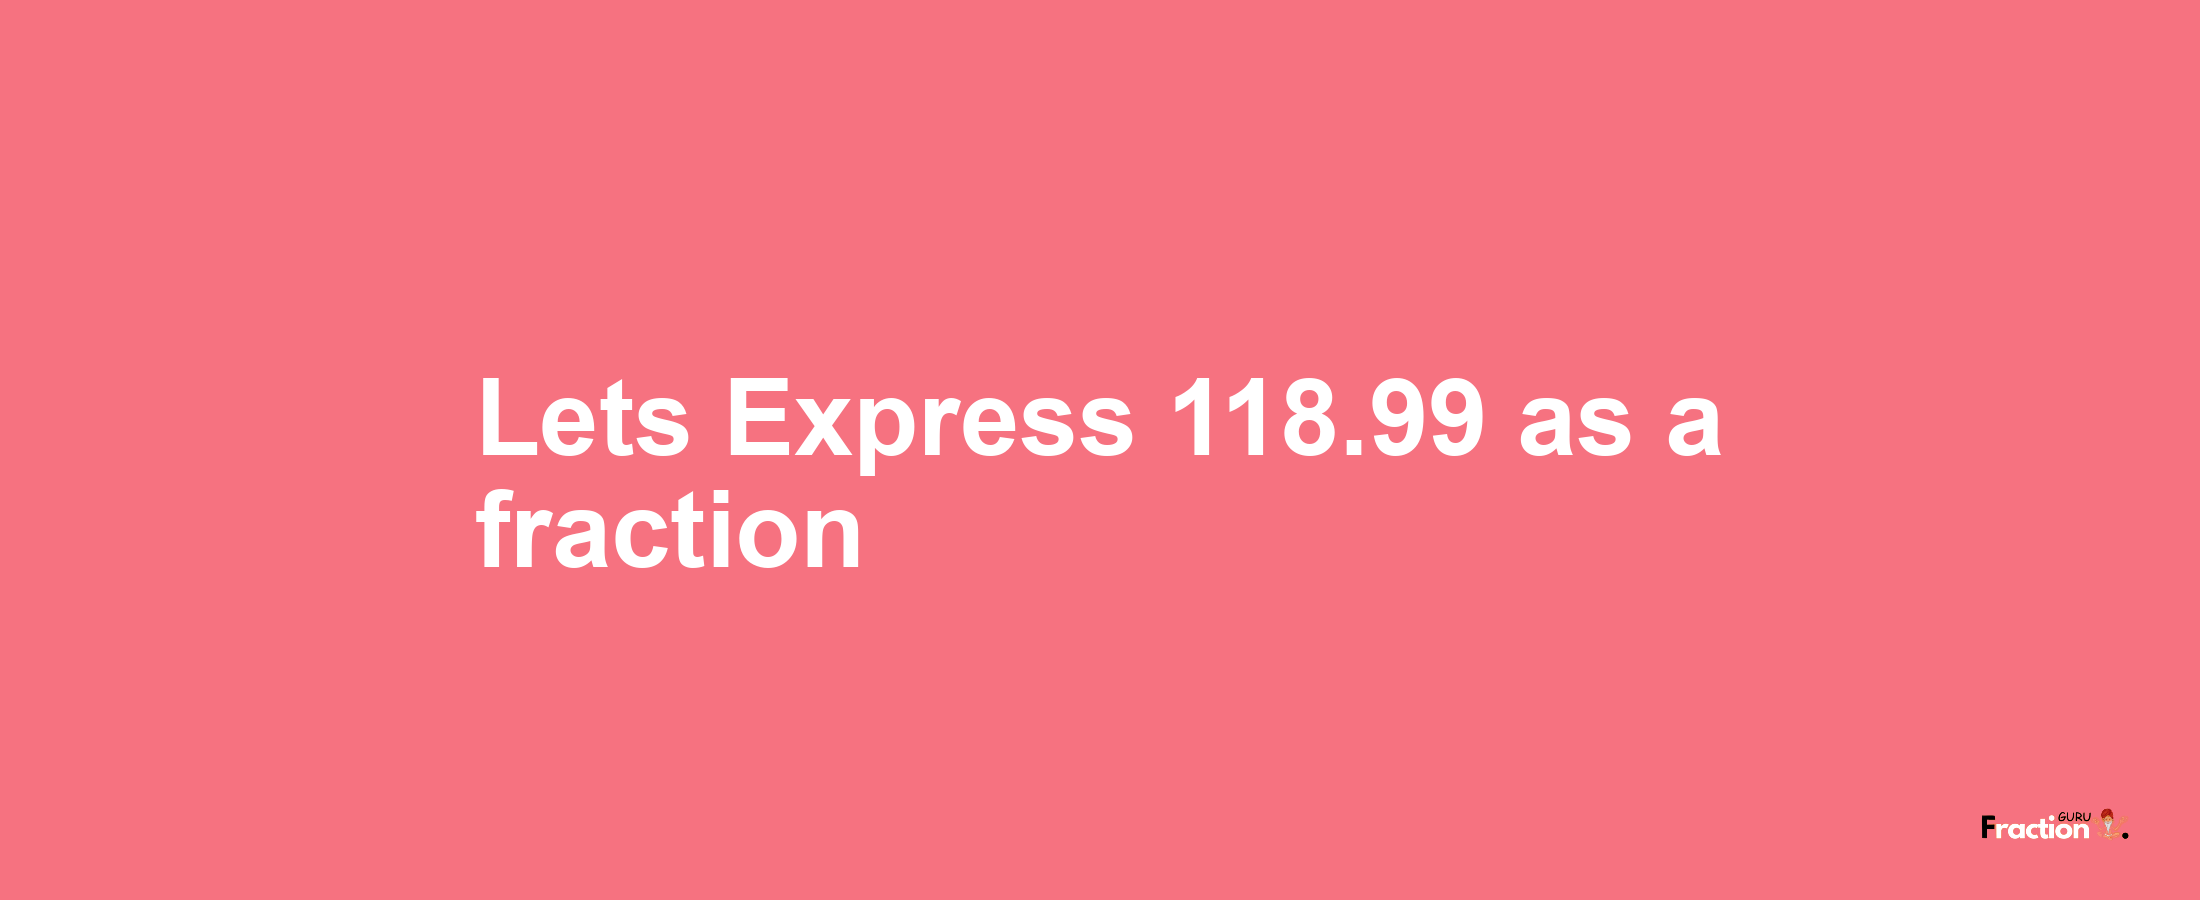 Lets Express 118.99 as afraction